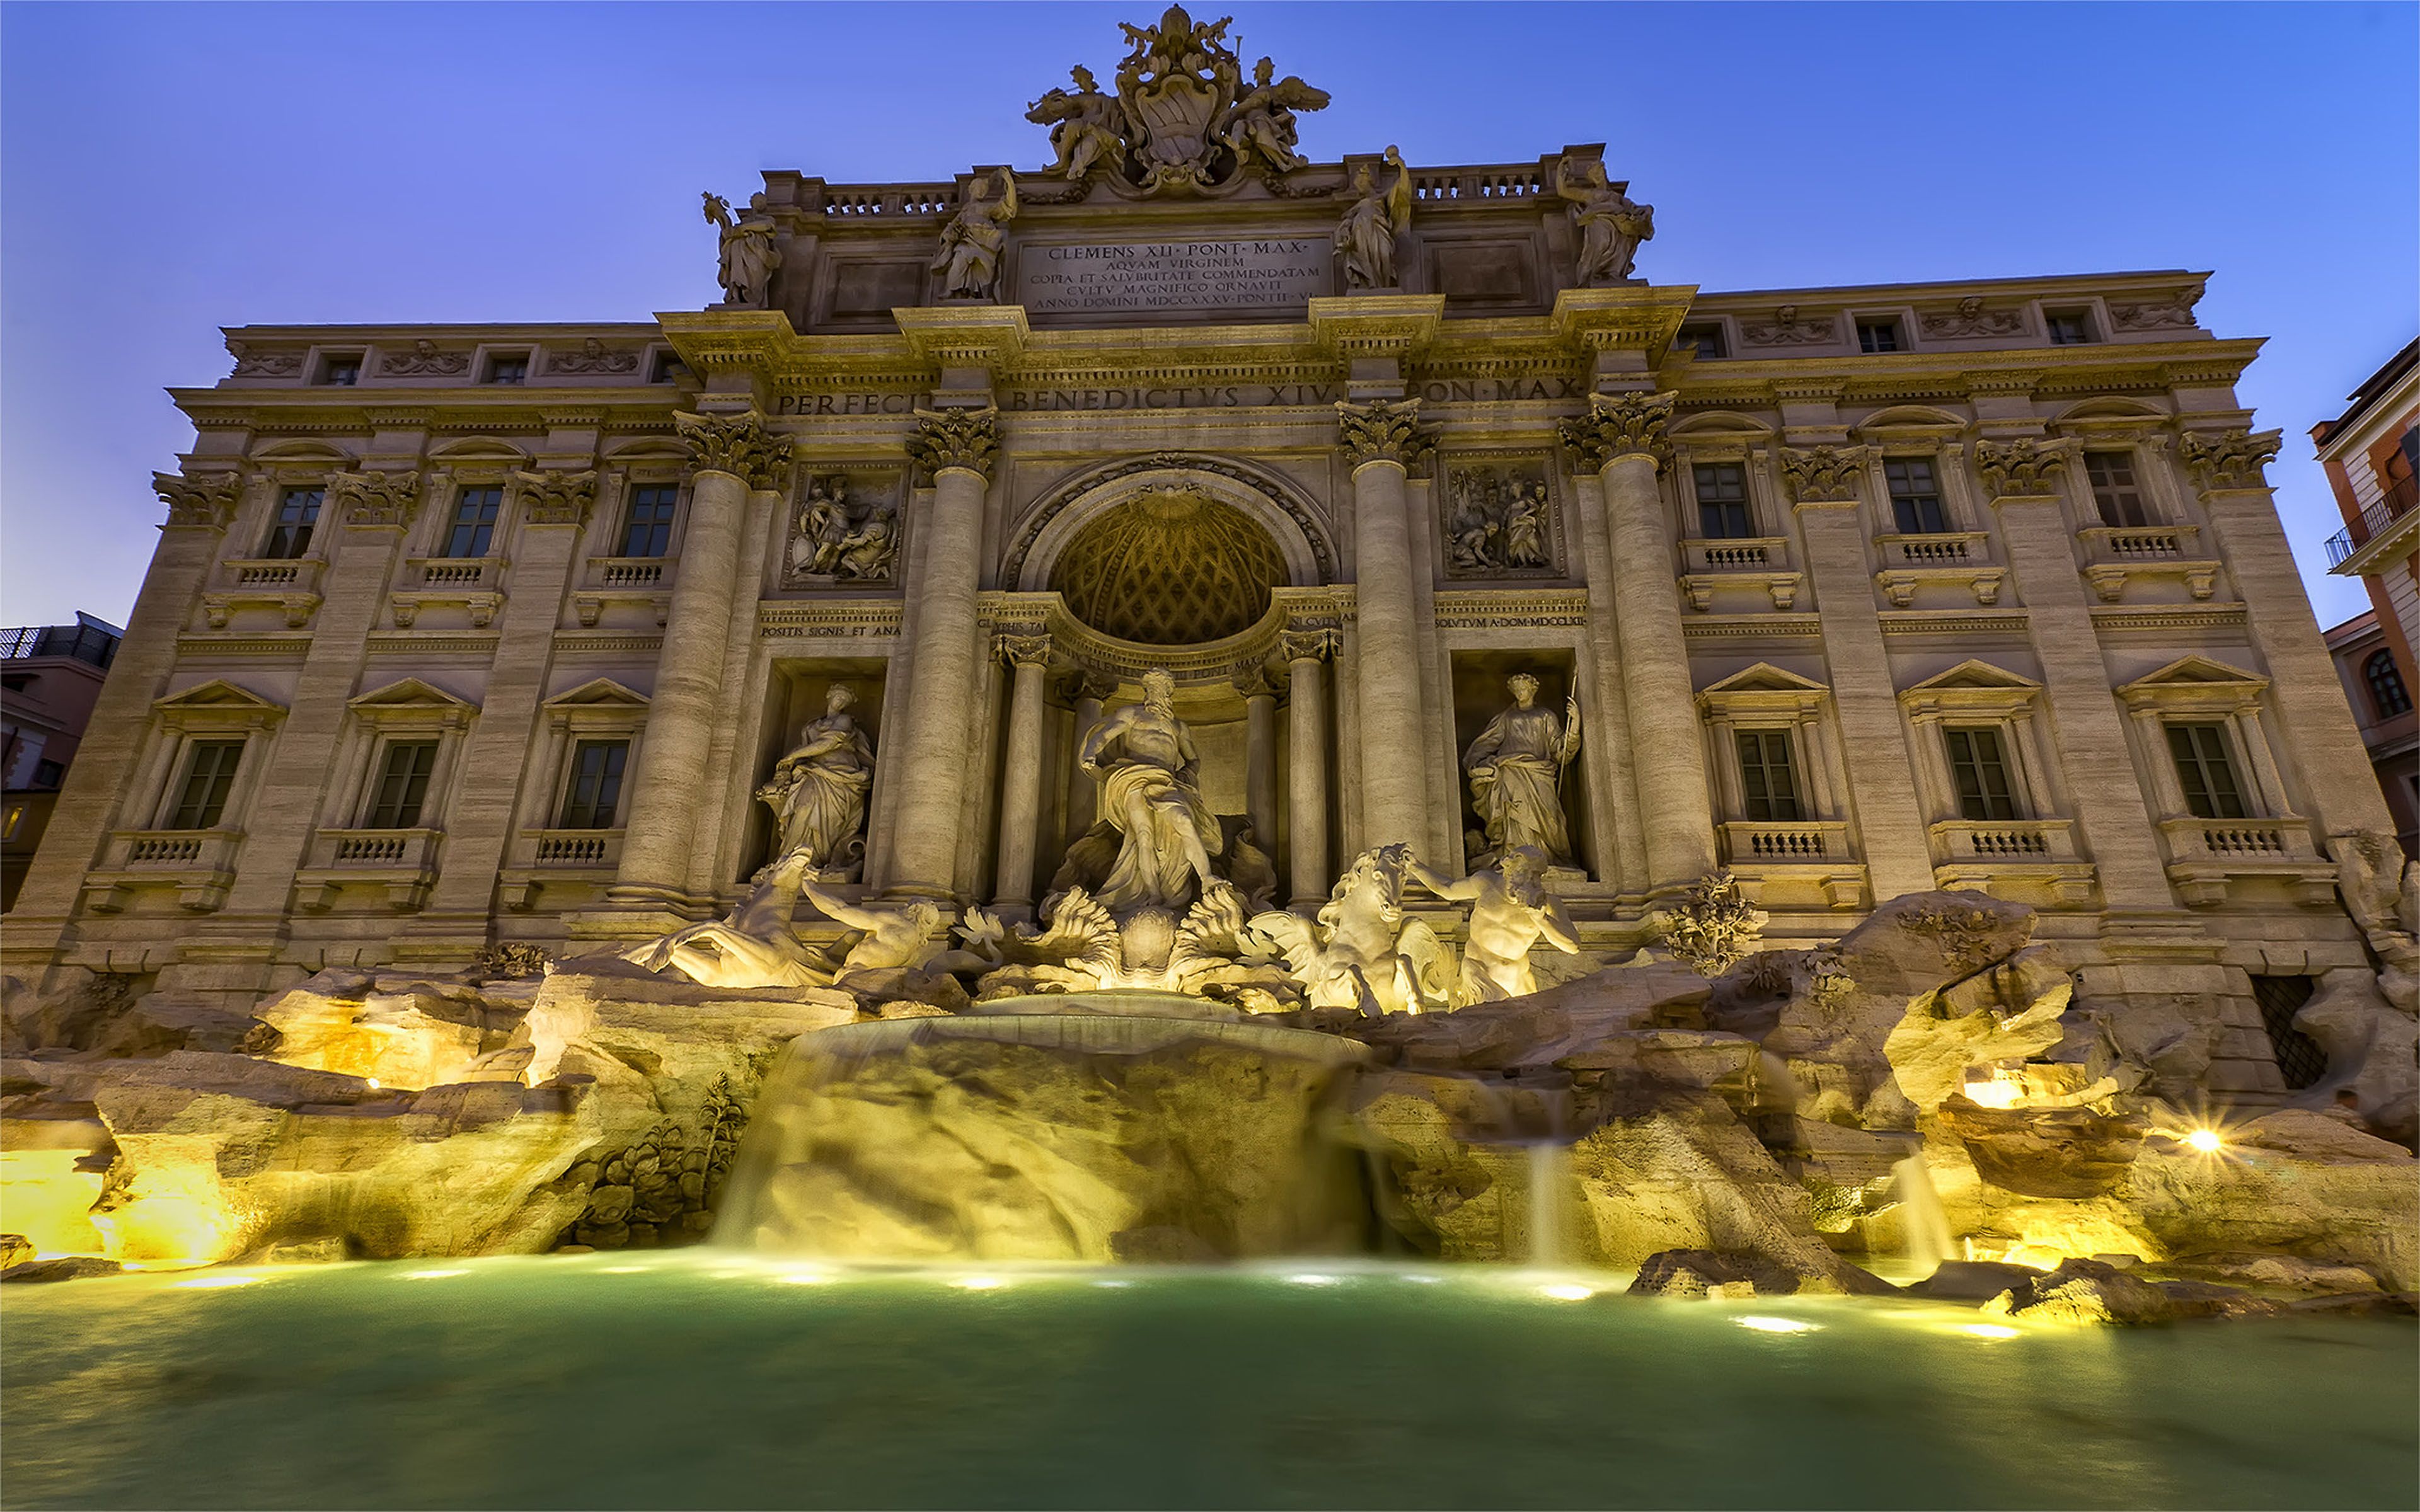 Trevi Fountain Trevi In Rome Italy The Largest Baroque Fountain